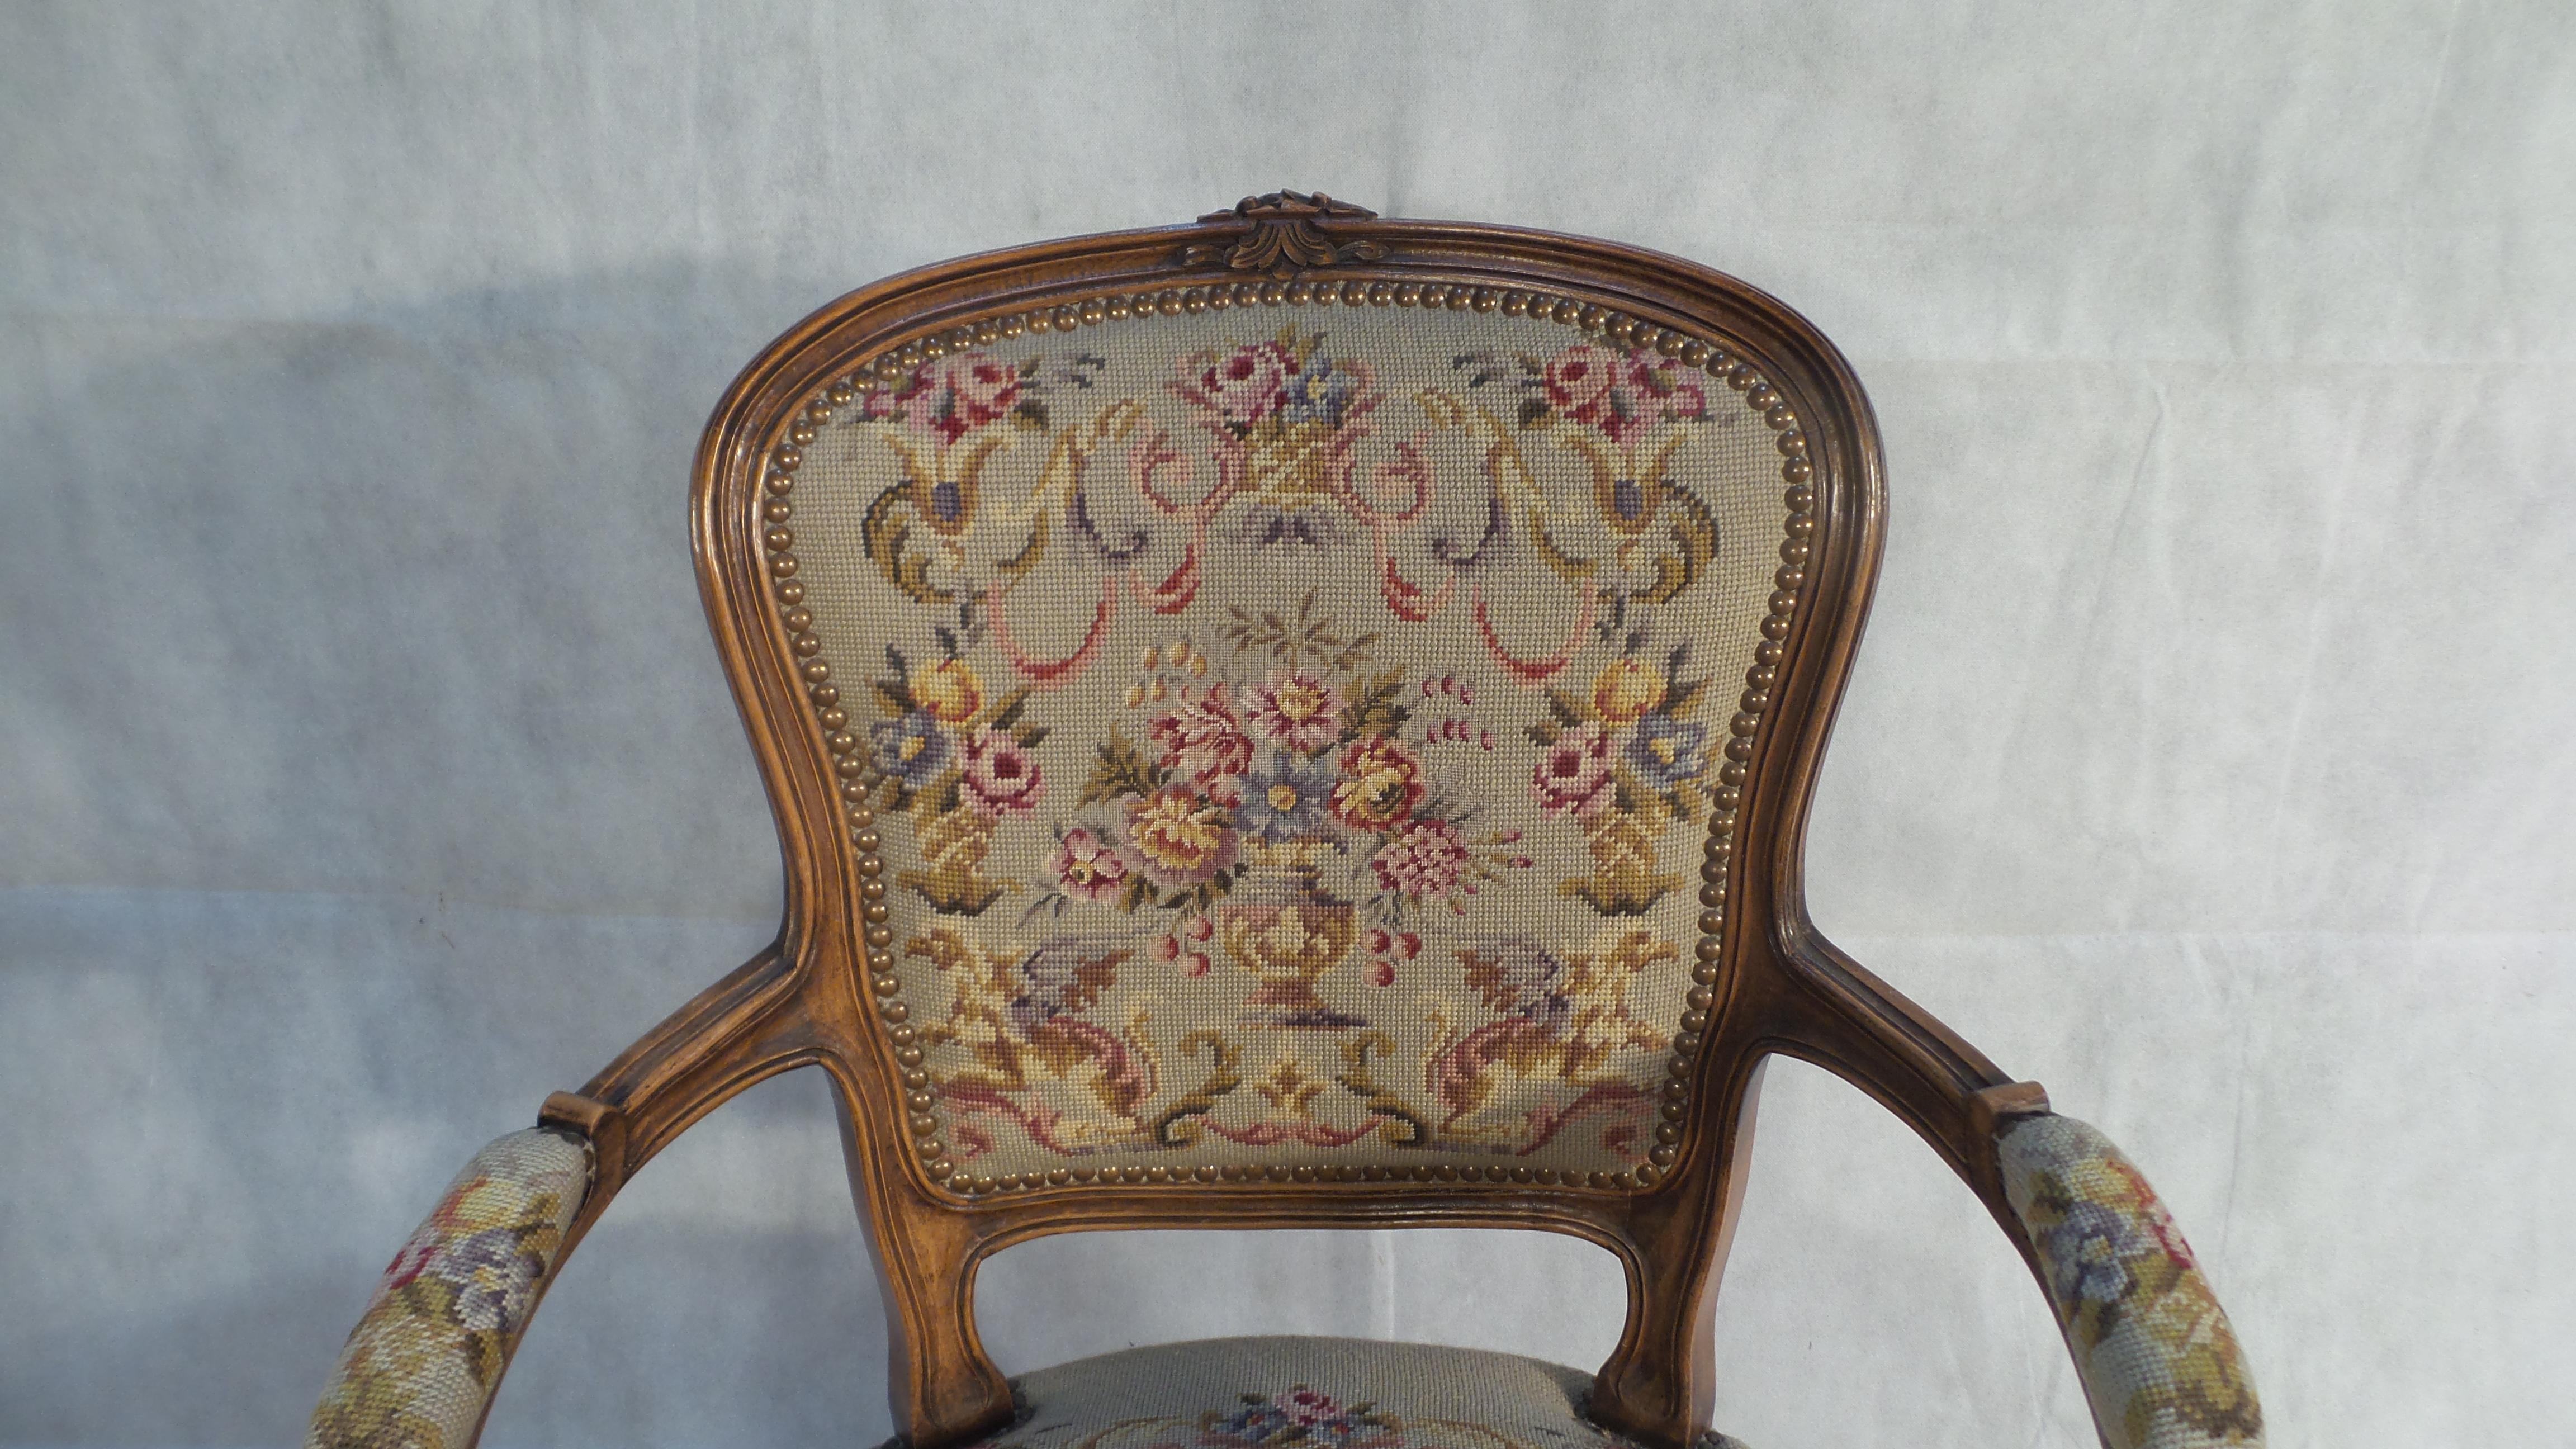 An outstanding example of this timeless example of French chic. This beautiful armchair has a tapestry seat and back with a delicate and elegant oak frame

The chairs background is in neutral colors whilst the detailed tapestry design is in